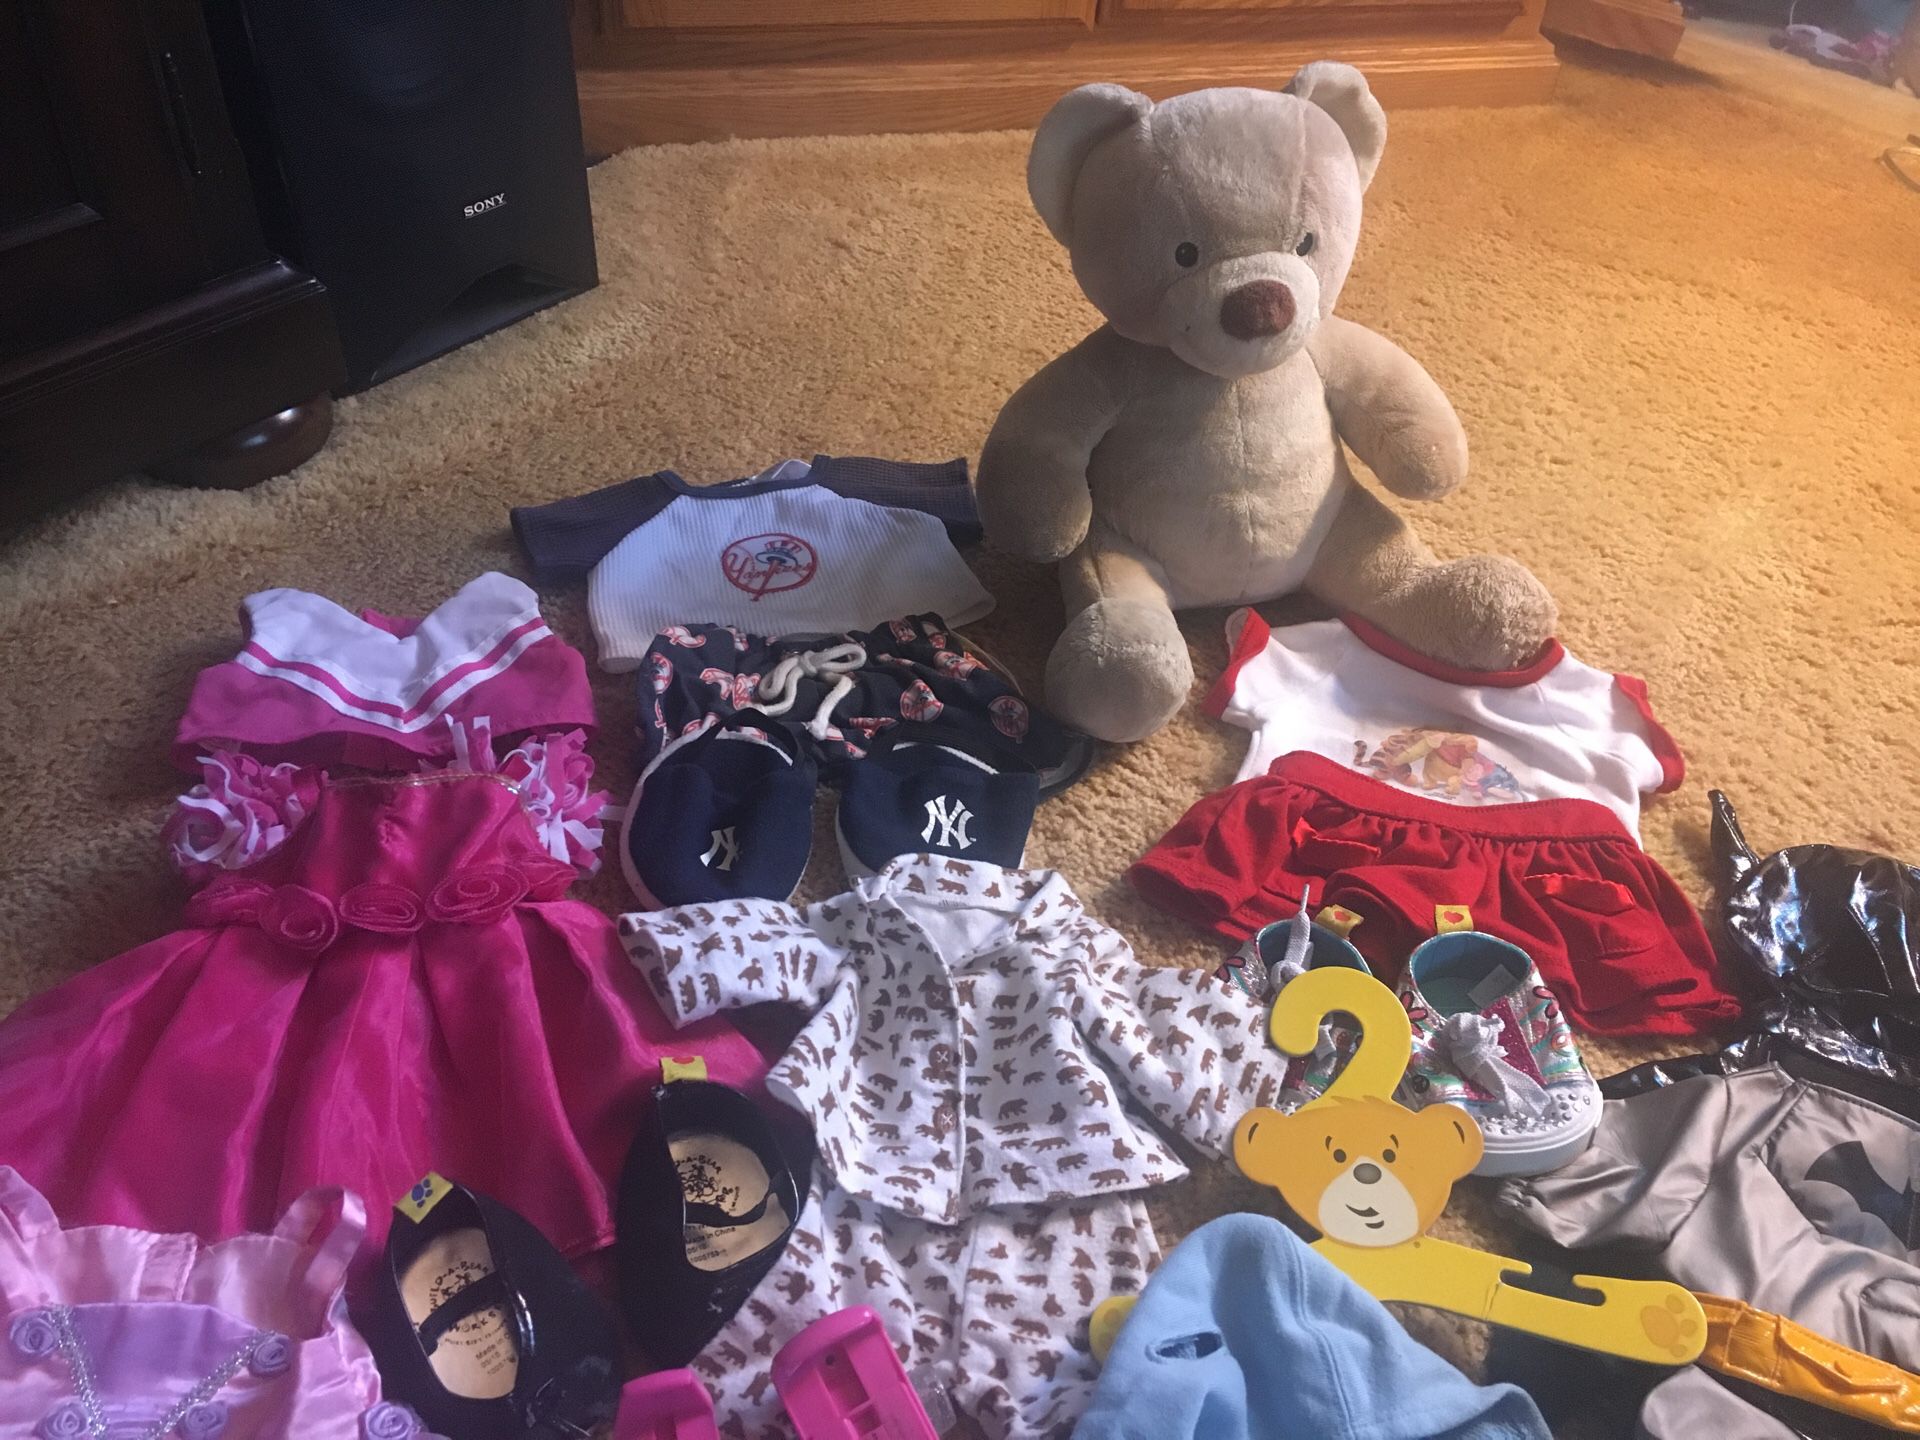 Classic build a bear,-and lots of accessories